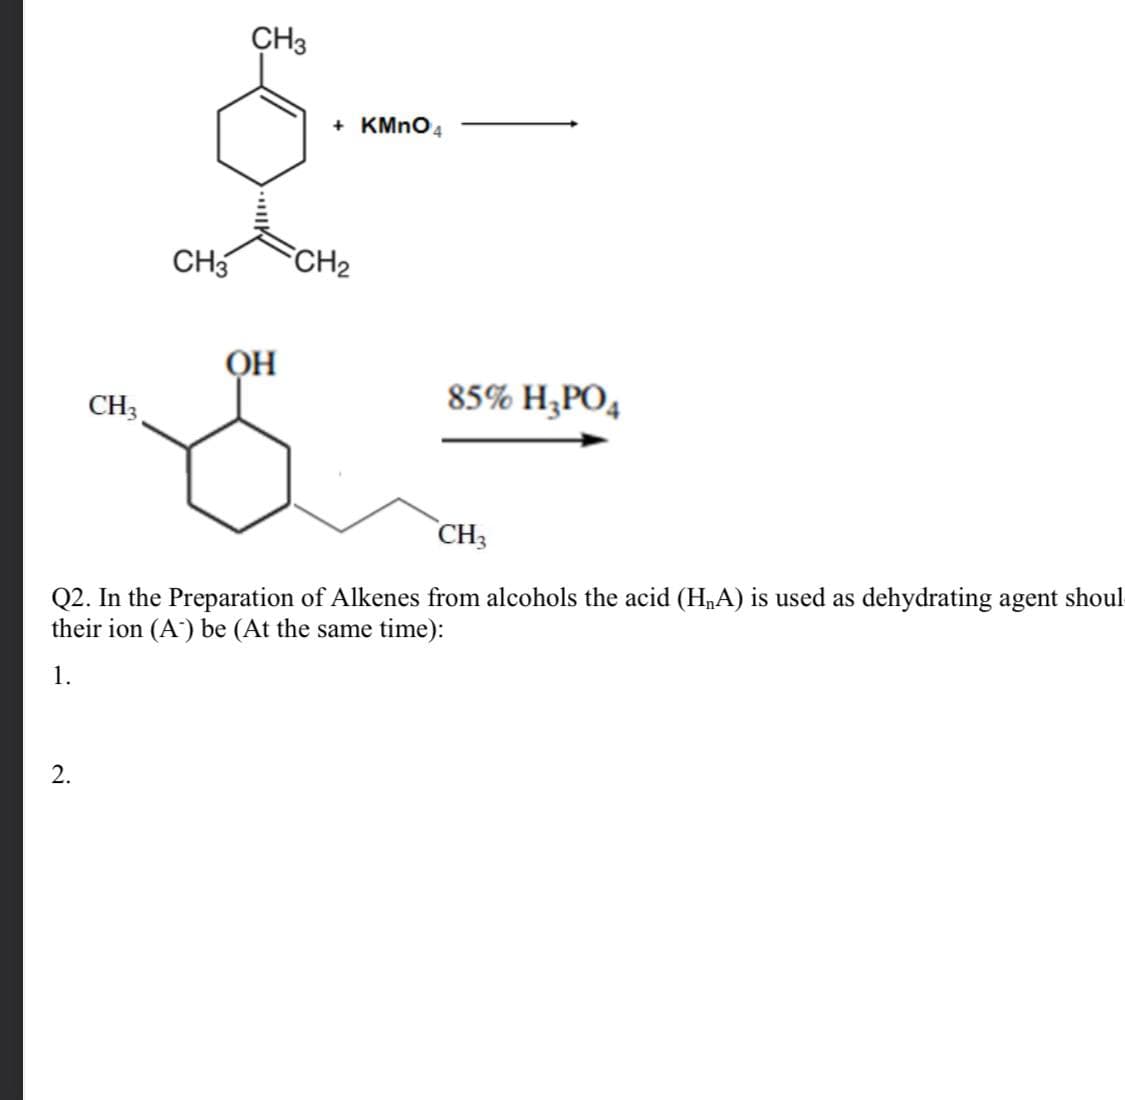 CH3
+ KMNO4
CH3
CH2
85% H¿PO4
CH3
CH3
Q2. In the Preparation of Alkenes from alcohols the acid (HA) is used as dehydrating agent shoul
their ion (A) be (At the same time):
1.
2.
